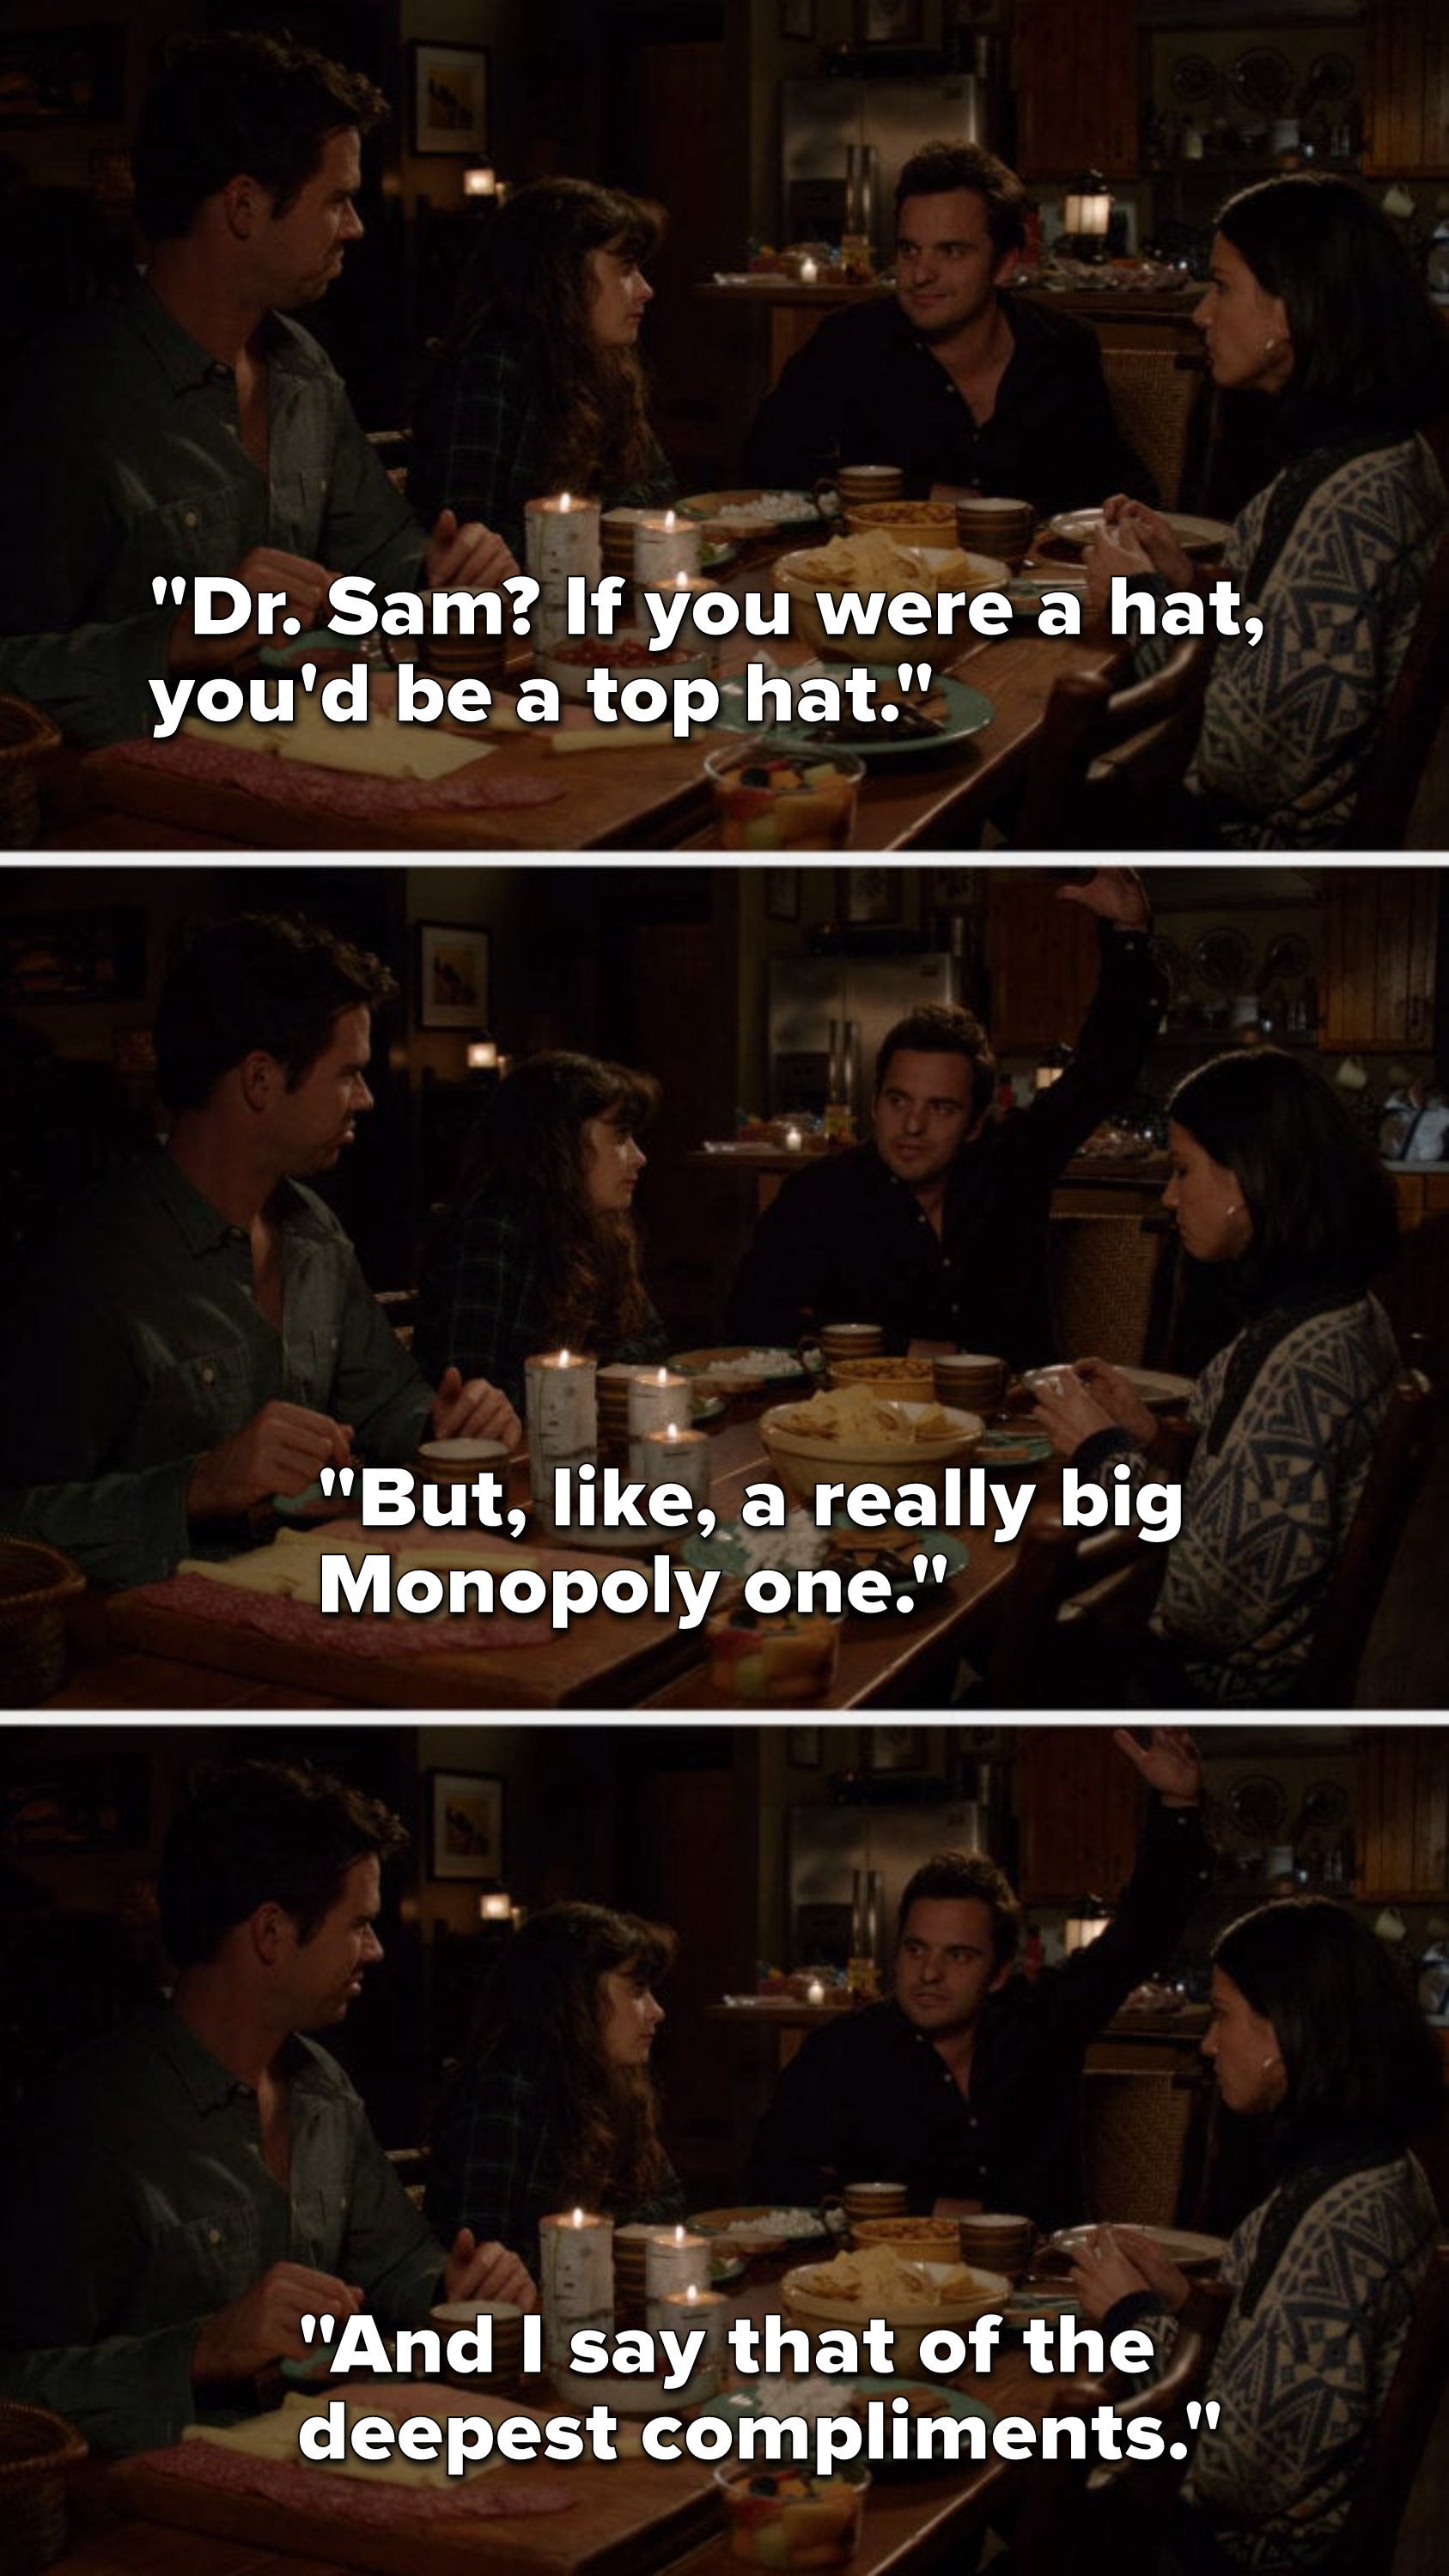 Nick says, Doctor Sam, if you were a hat, you&#x27;d be a top hat, but like a really big Monopoly one, and I say that of the deepest compliments